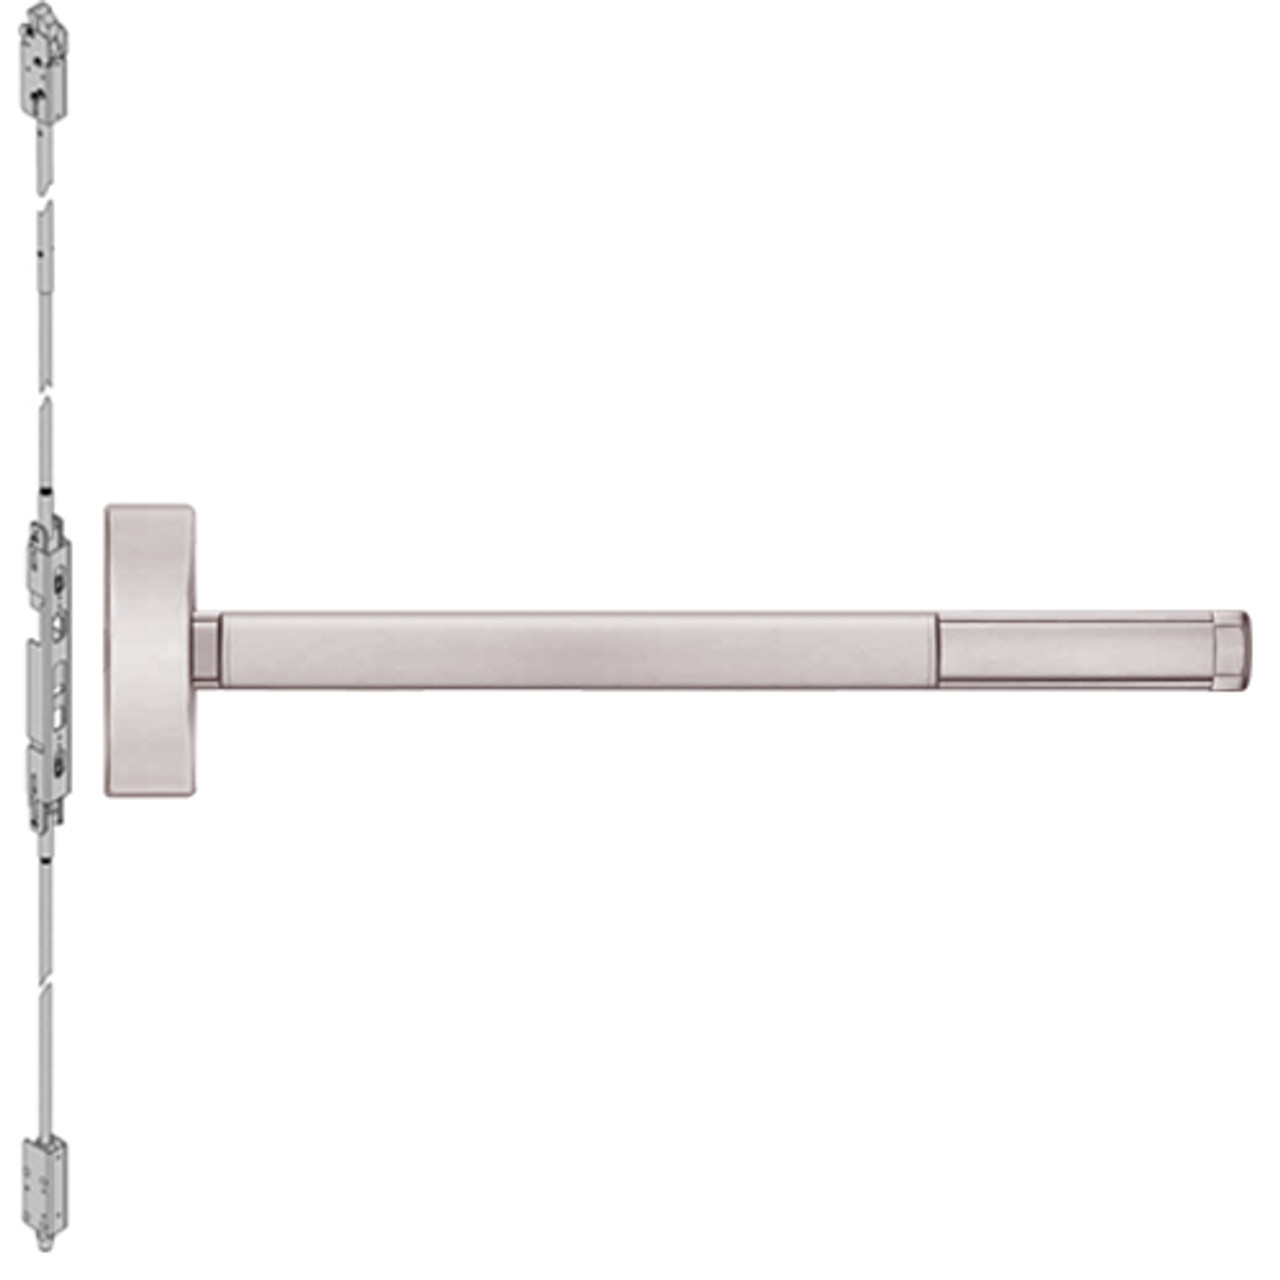 DE2803-628-36 PHI 2800 Series Concealed Vertical Rod Exit Device with Delayed Egress Prepped for Key Retracts Latchbolt in Satin Aluminum Finish